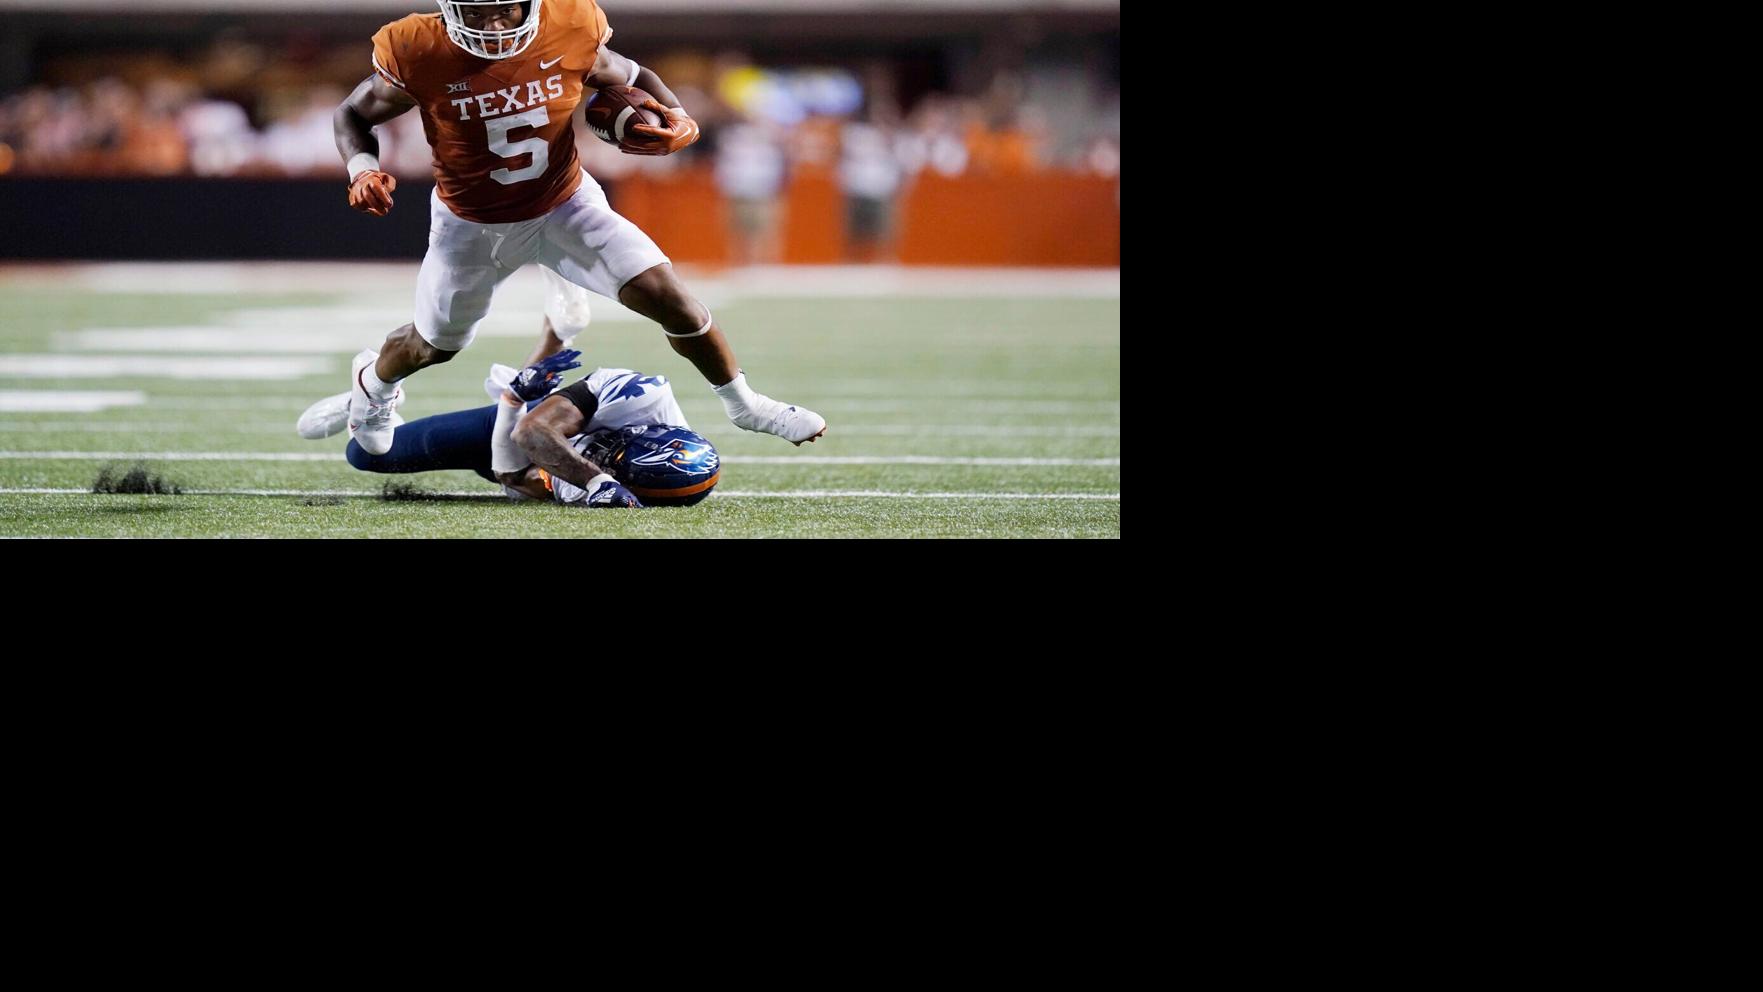 Former Texas star Robinson set to test RB value in NFL draft